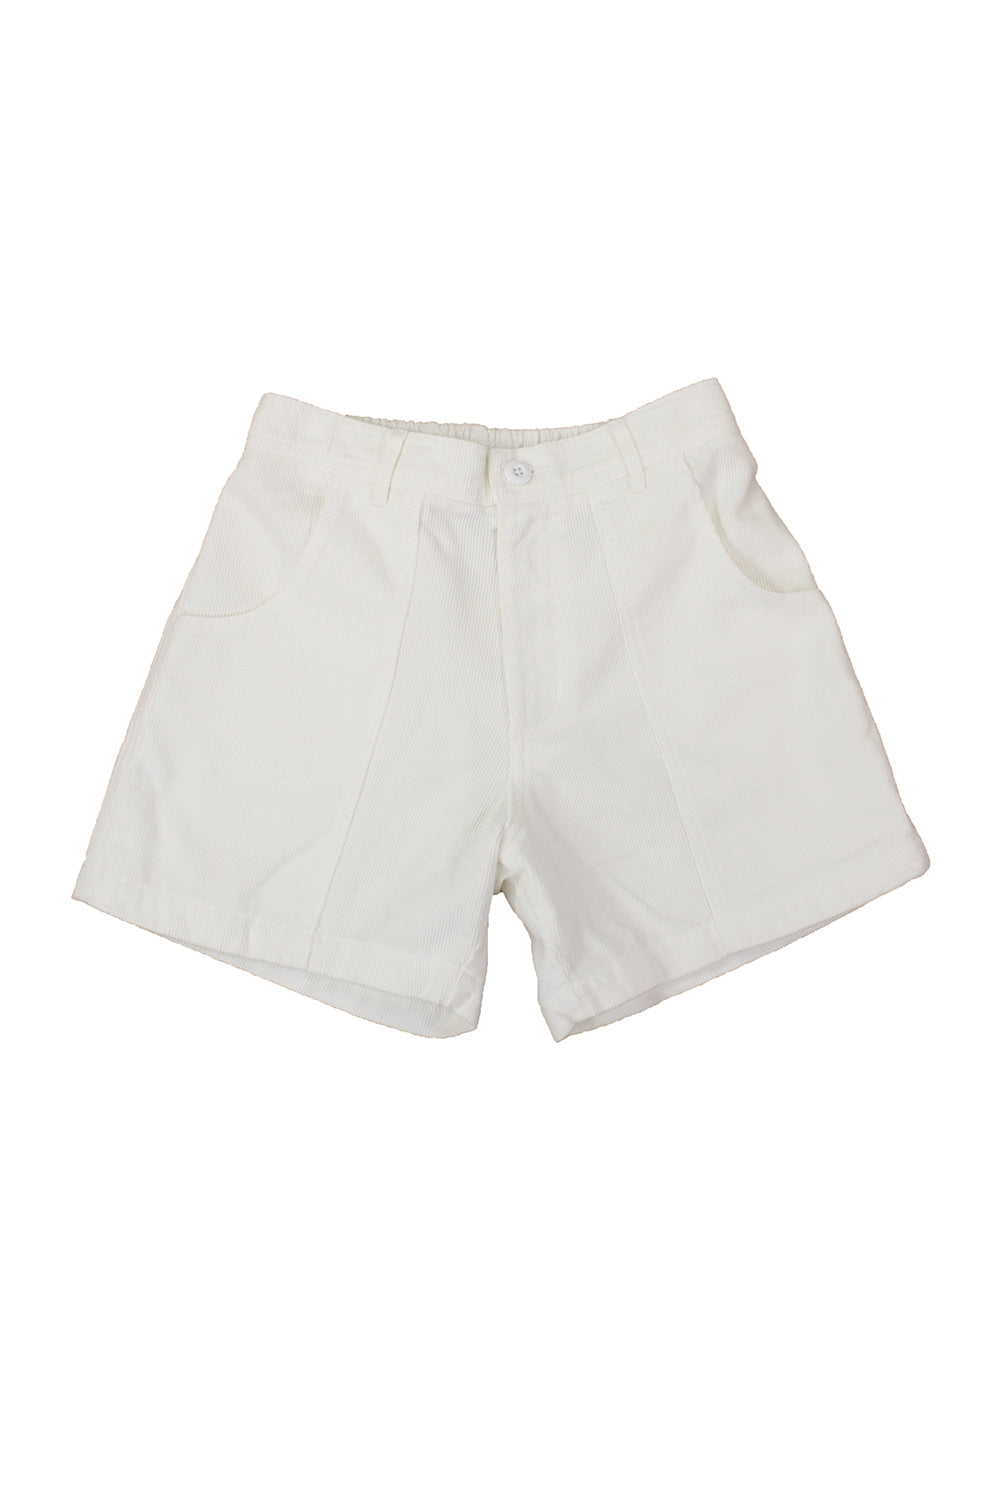 Cabuya Cord Short | Jungmaven Hemp Clothing & Accessories / Color: Washed White